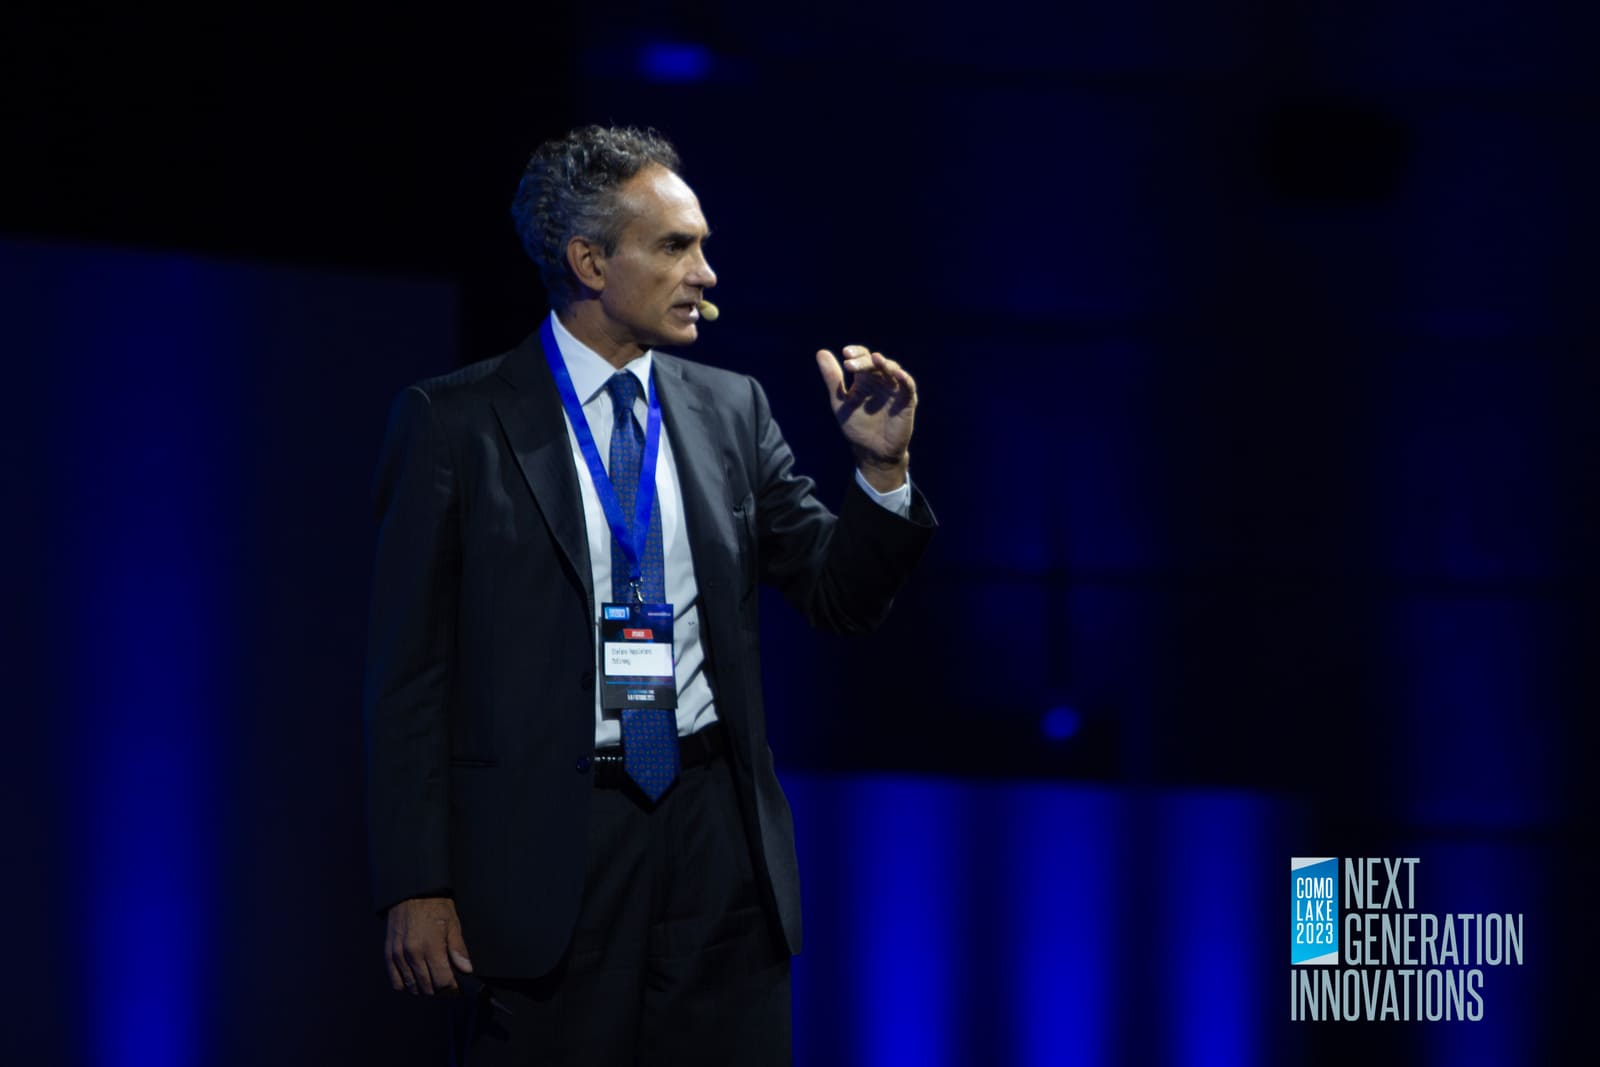 Stefano Napoletano, Leader of Artificial Intelligence, Transportation and Logistics Italy, McKinsey